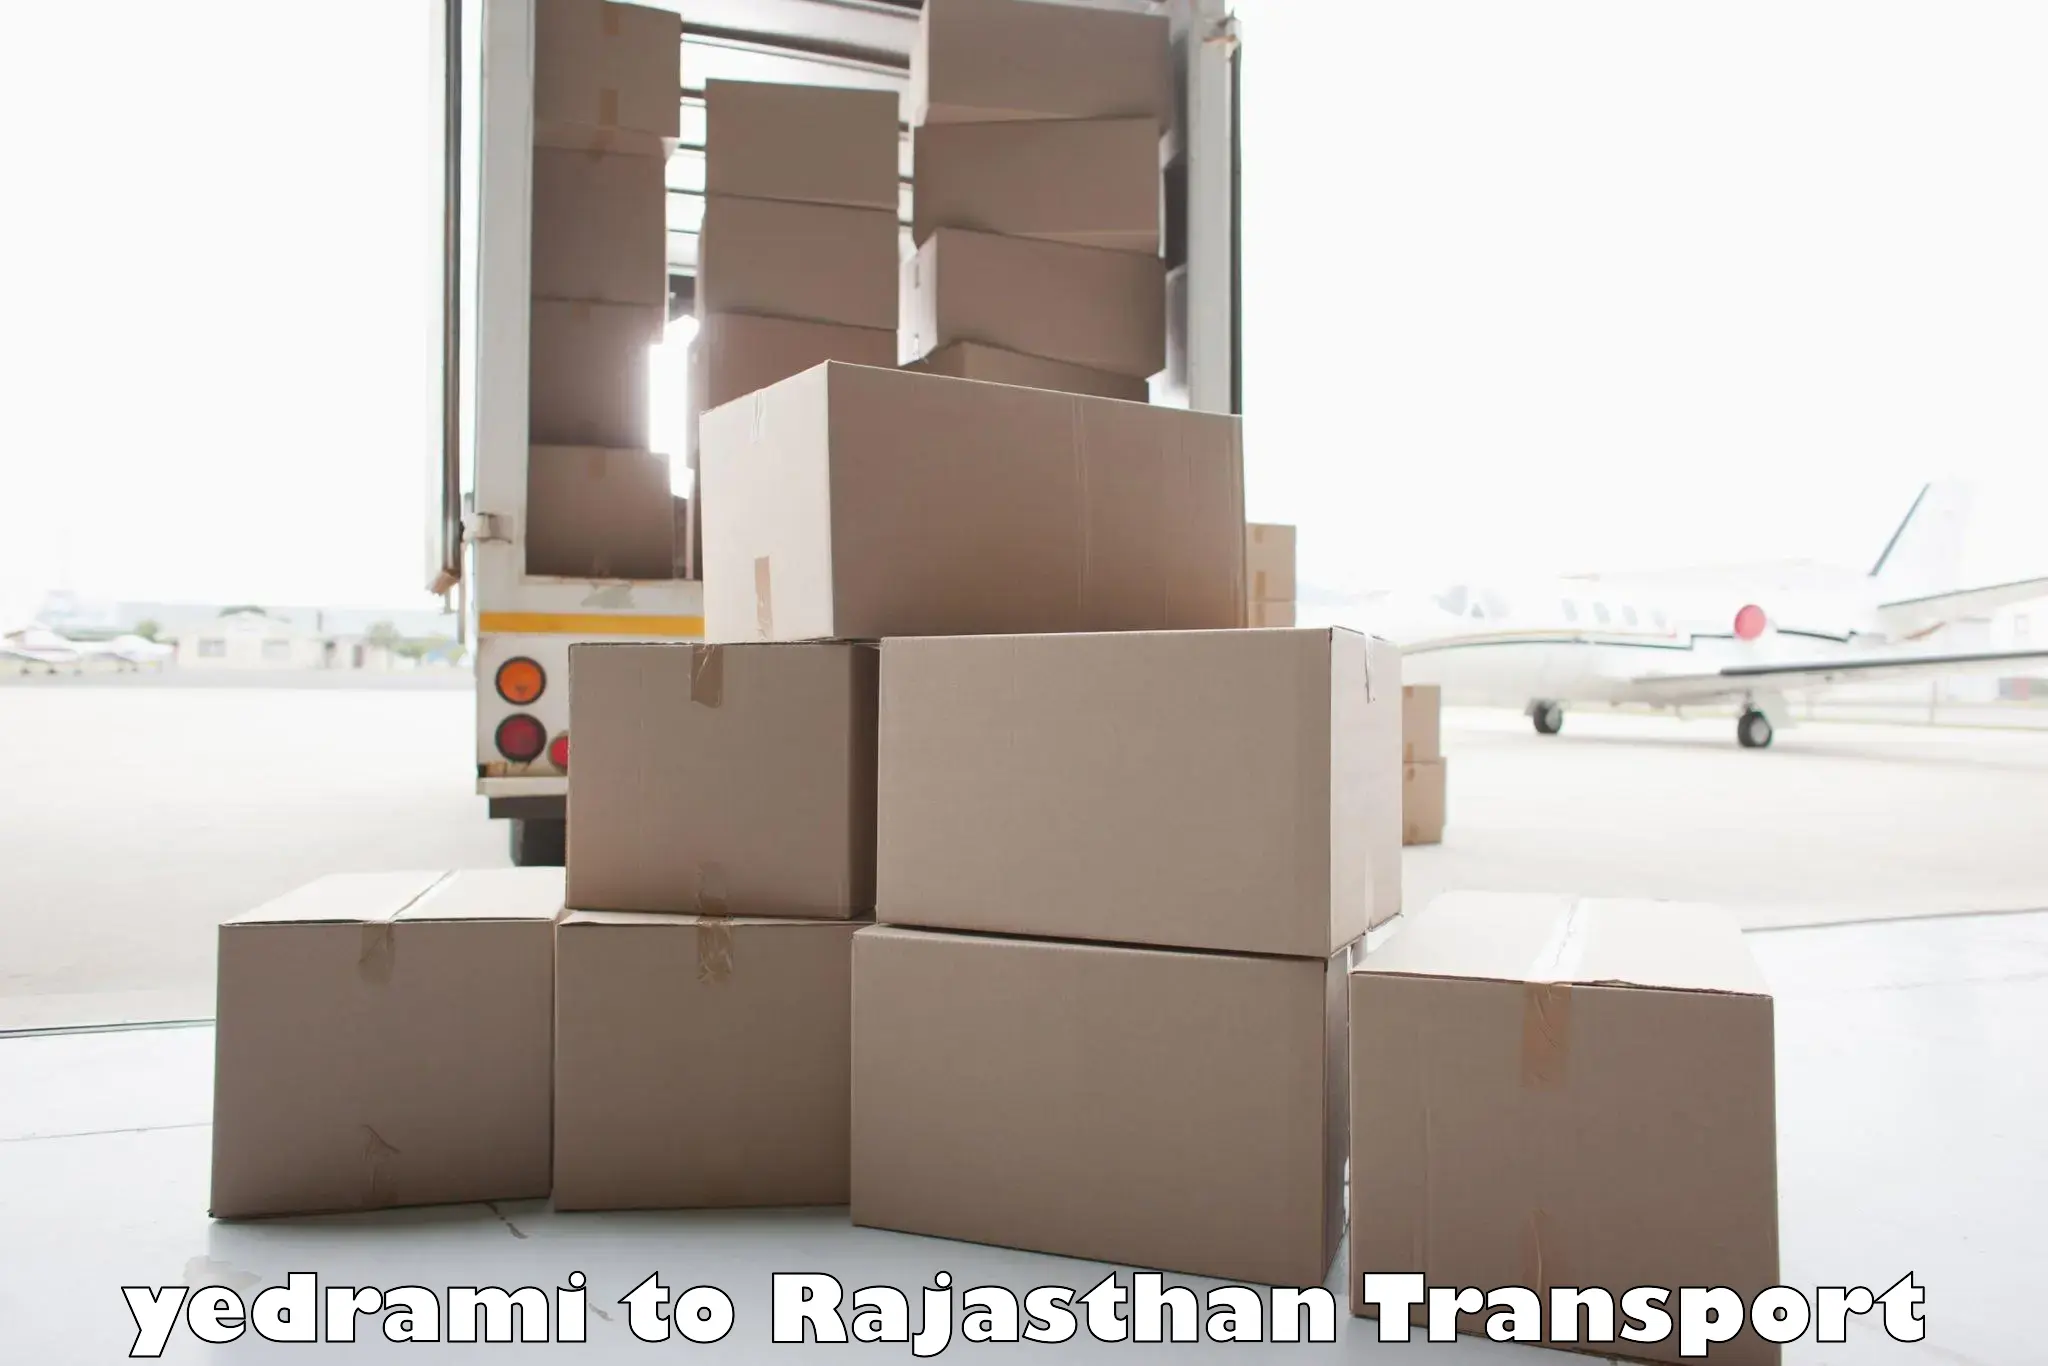 Daily parcel service transport yedrami to Bharatpur